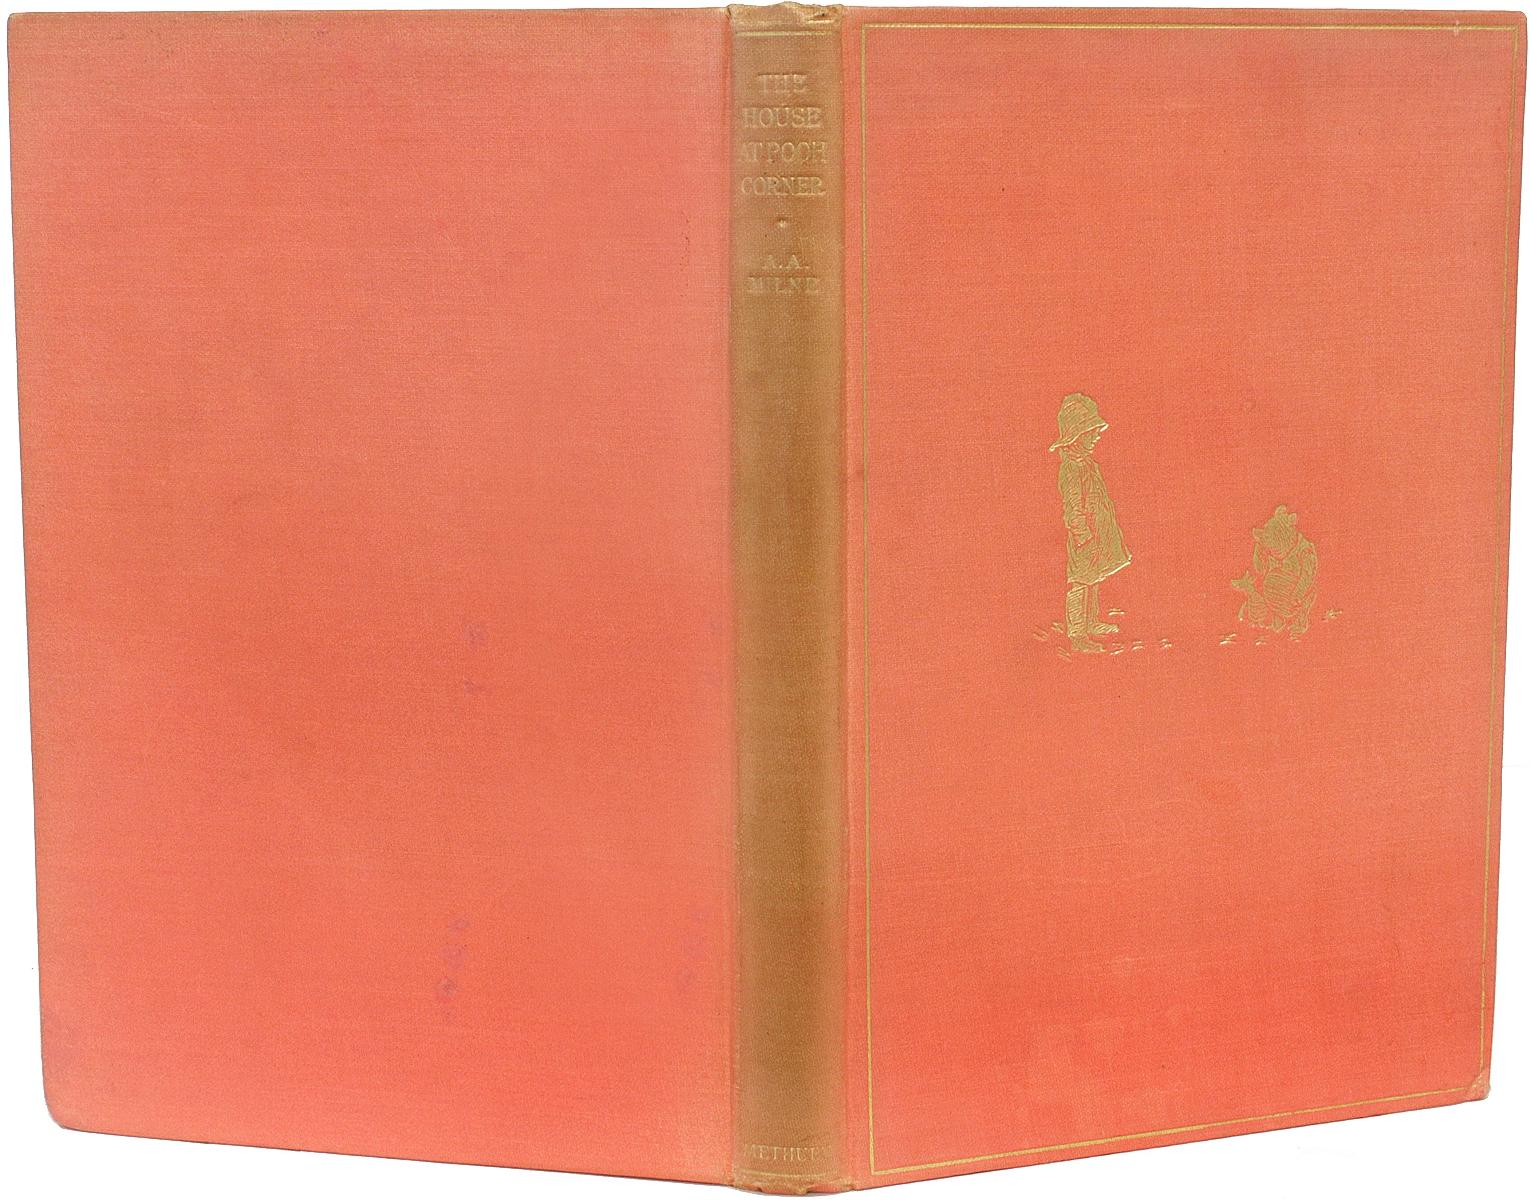 AUTHOR: MILNE, A. A. 

TITLE: The House At Pooh Corner.

PUBLISHER: London: Methuen & Co. Ltd., 1928.

DESCRIPTION: FIRST EDITION. 1 volume, illustrated by E. H. Shephard. Bound in the publisher's original gilt stamped pink cloth, top edge